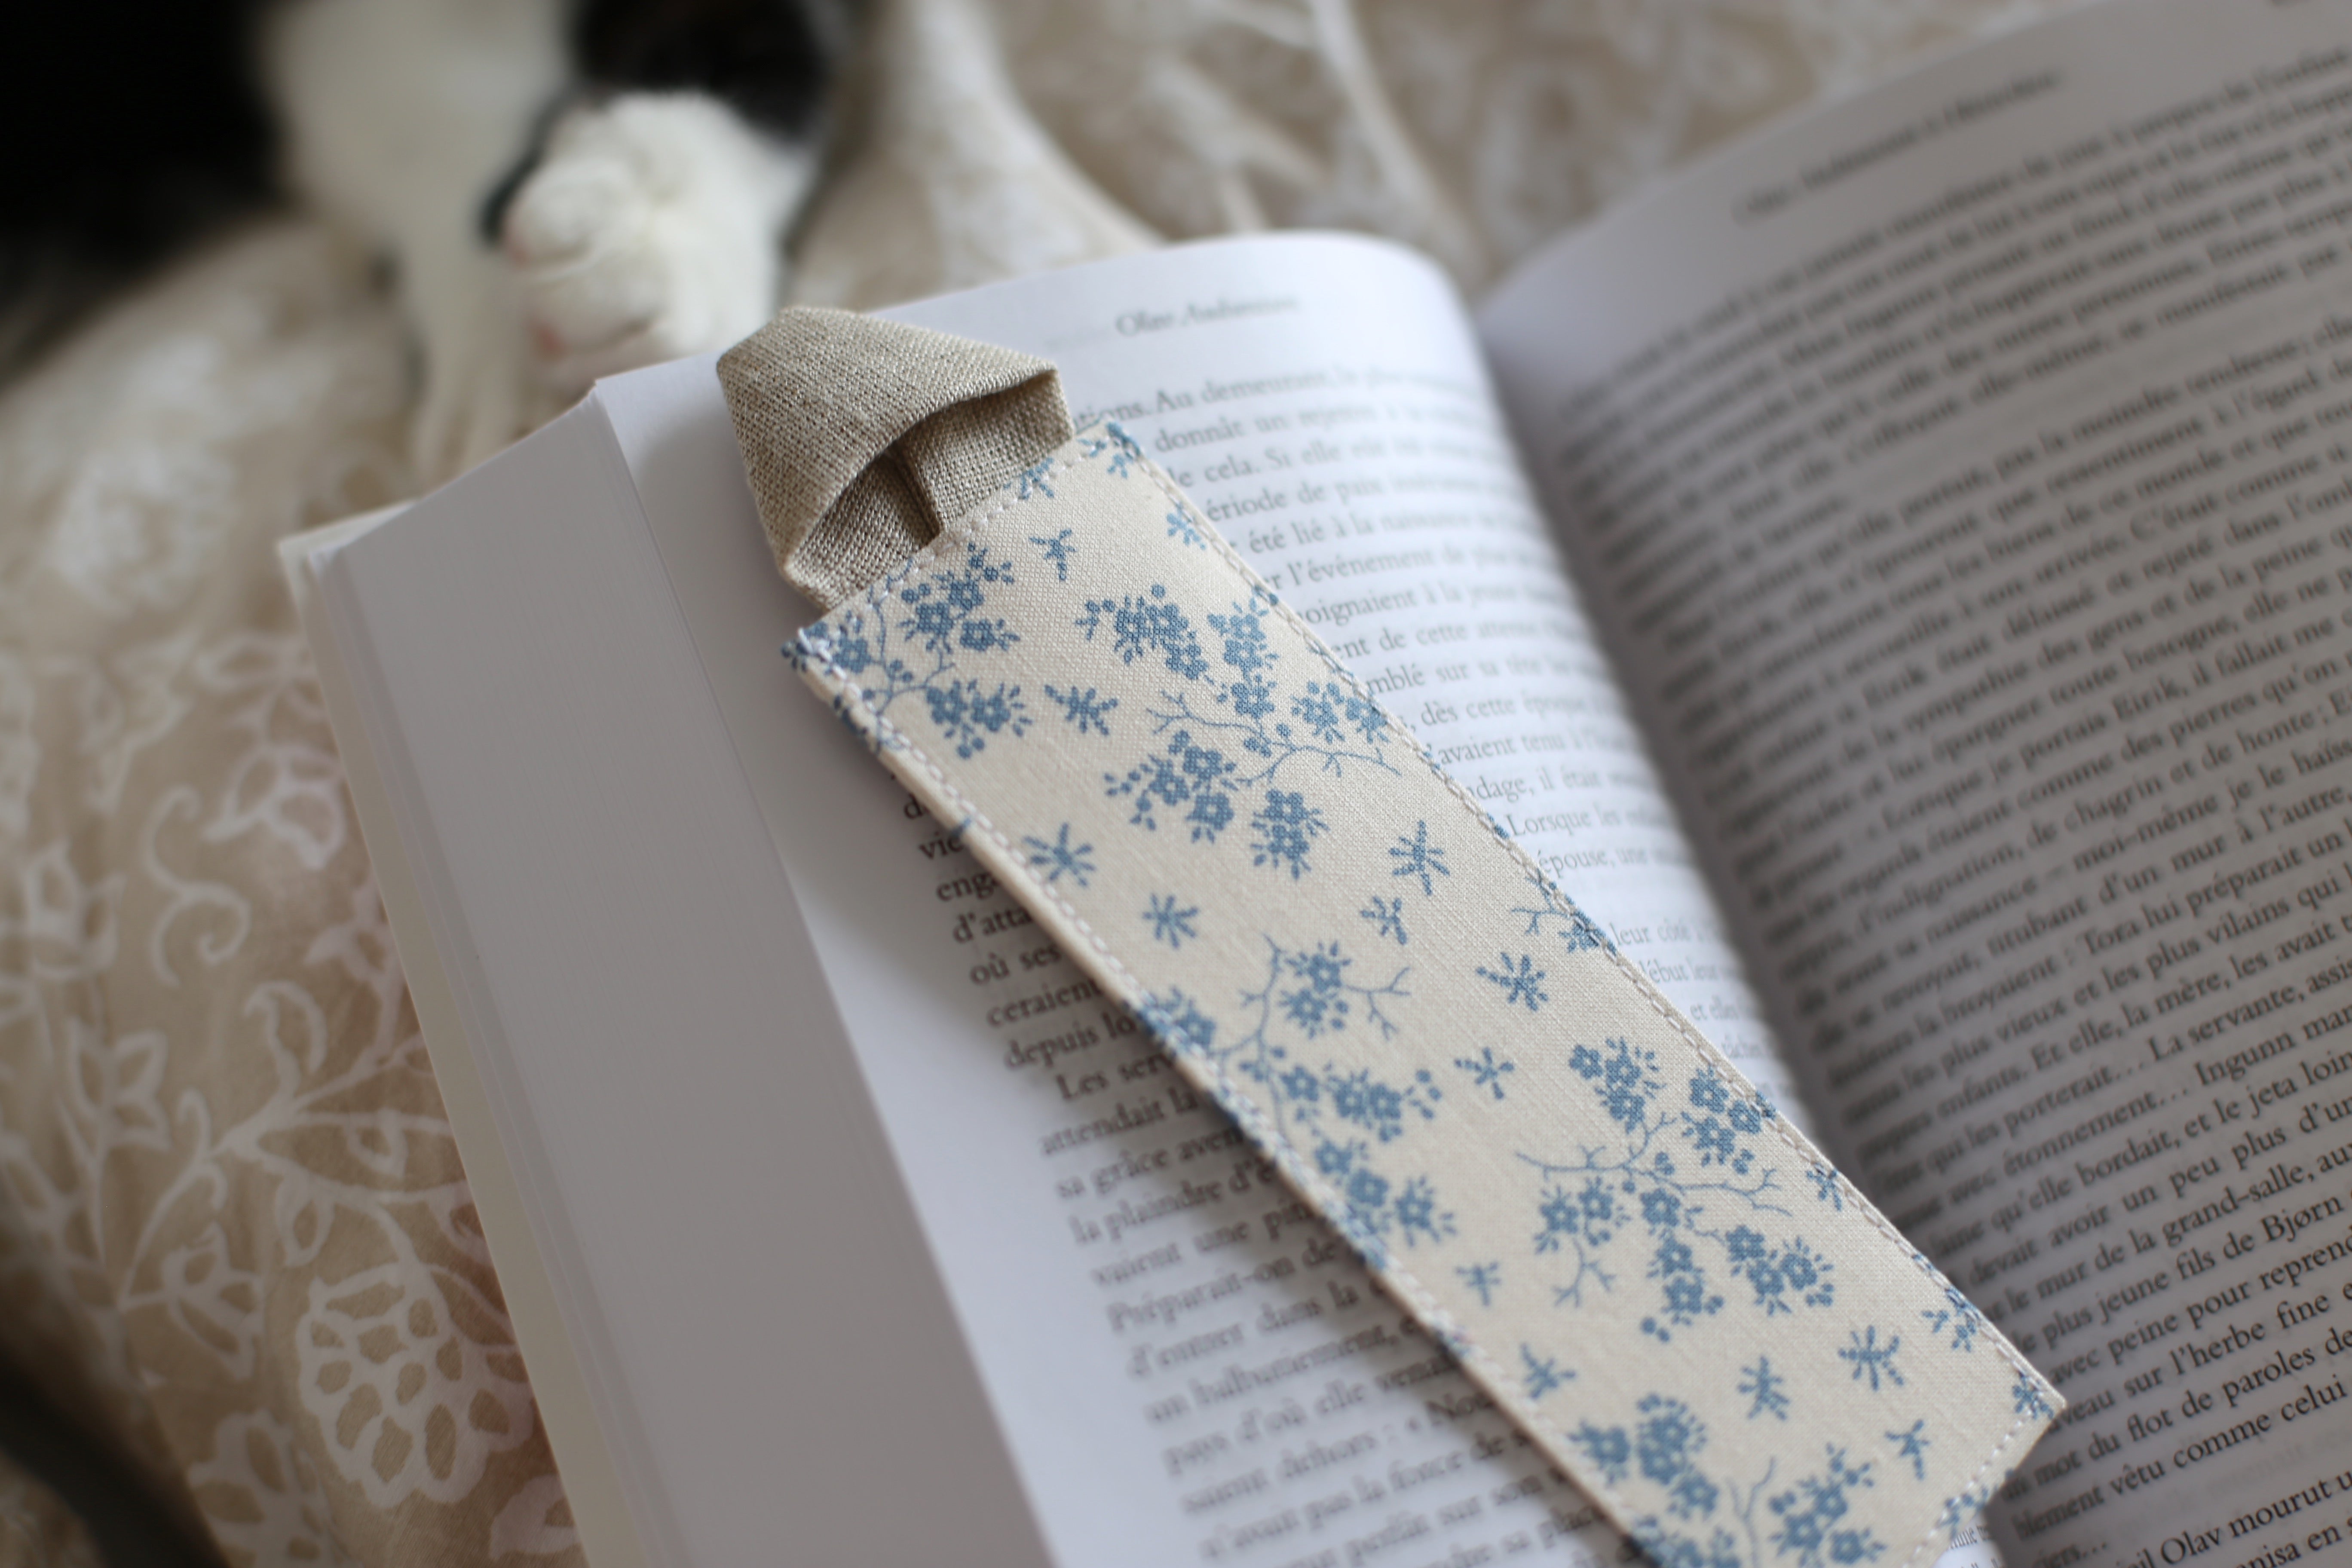 Bookmark "Emma Bovary" - Coral